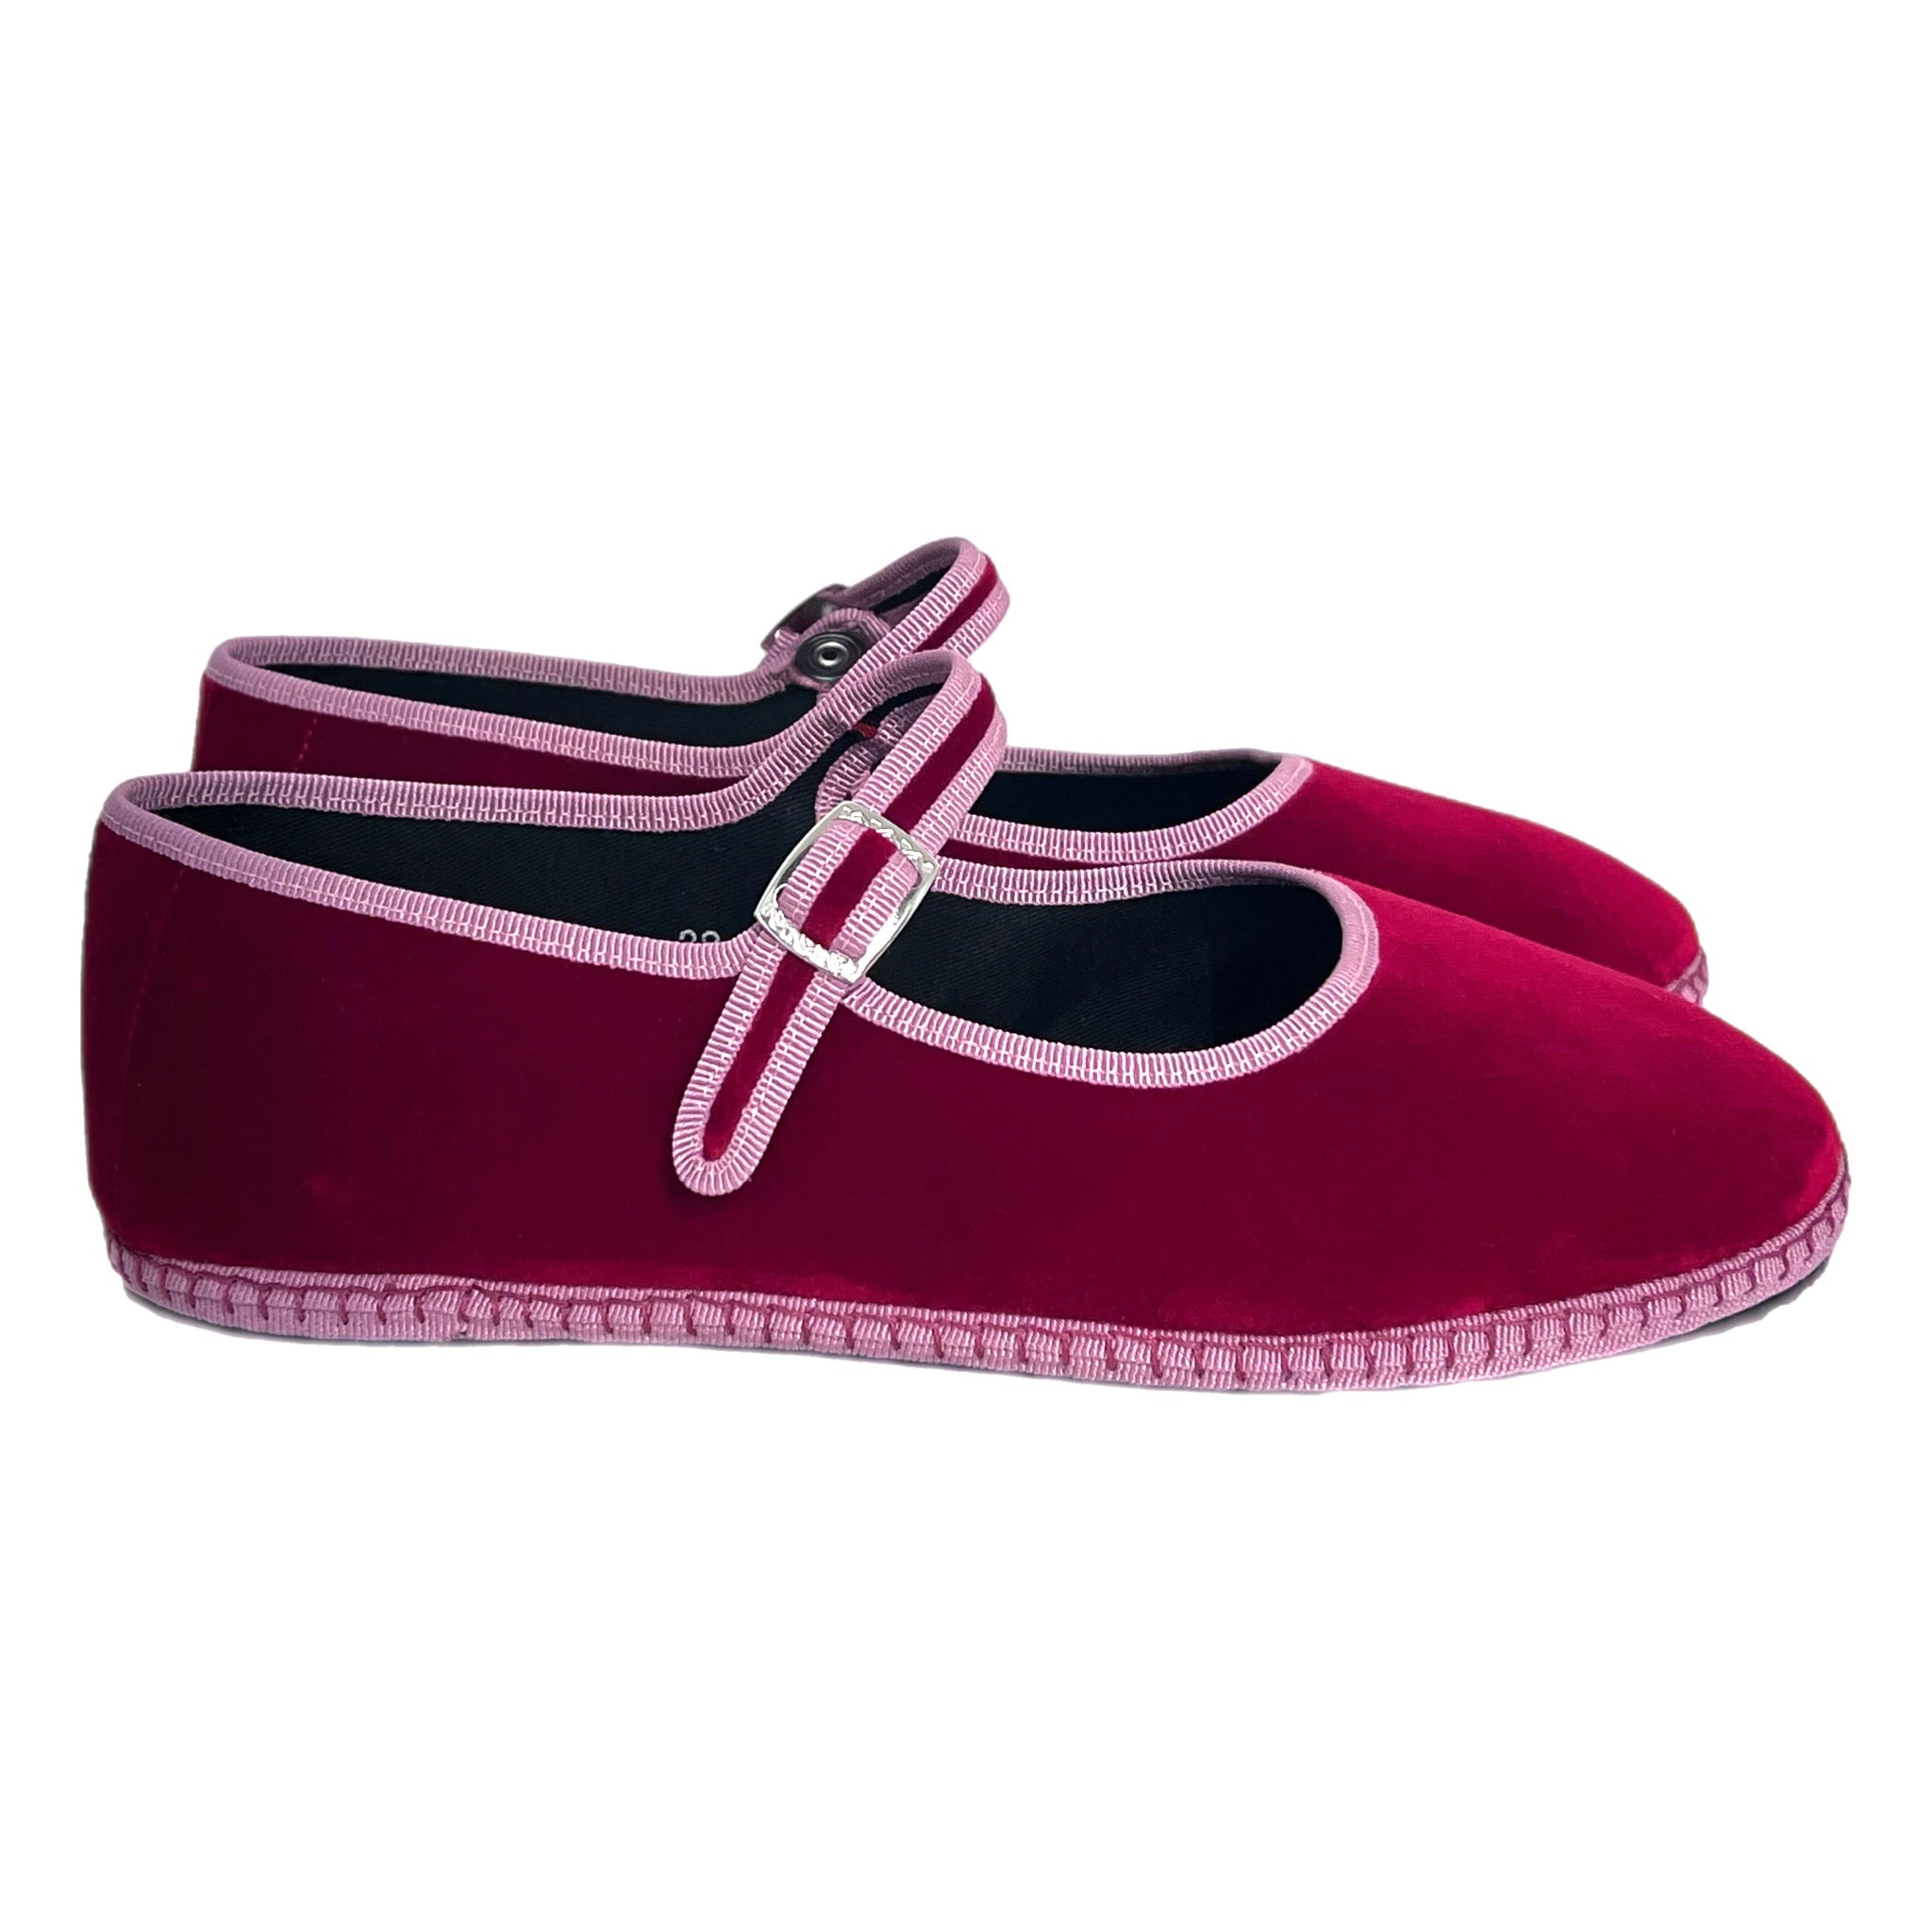 Red and pink Friulane bebè shoes in velvet with hand-stitched rubber sole, made in Friuli, Italy